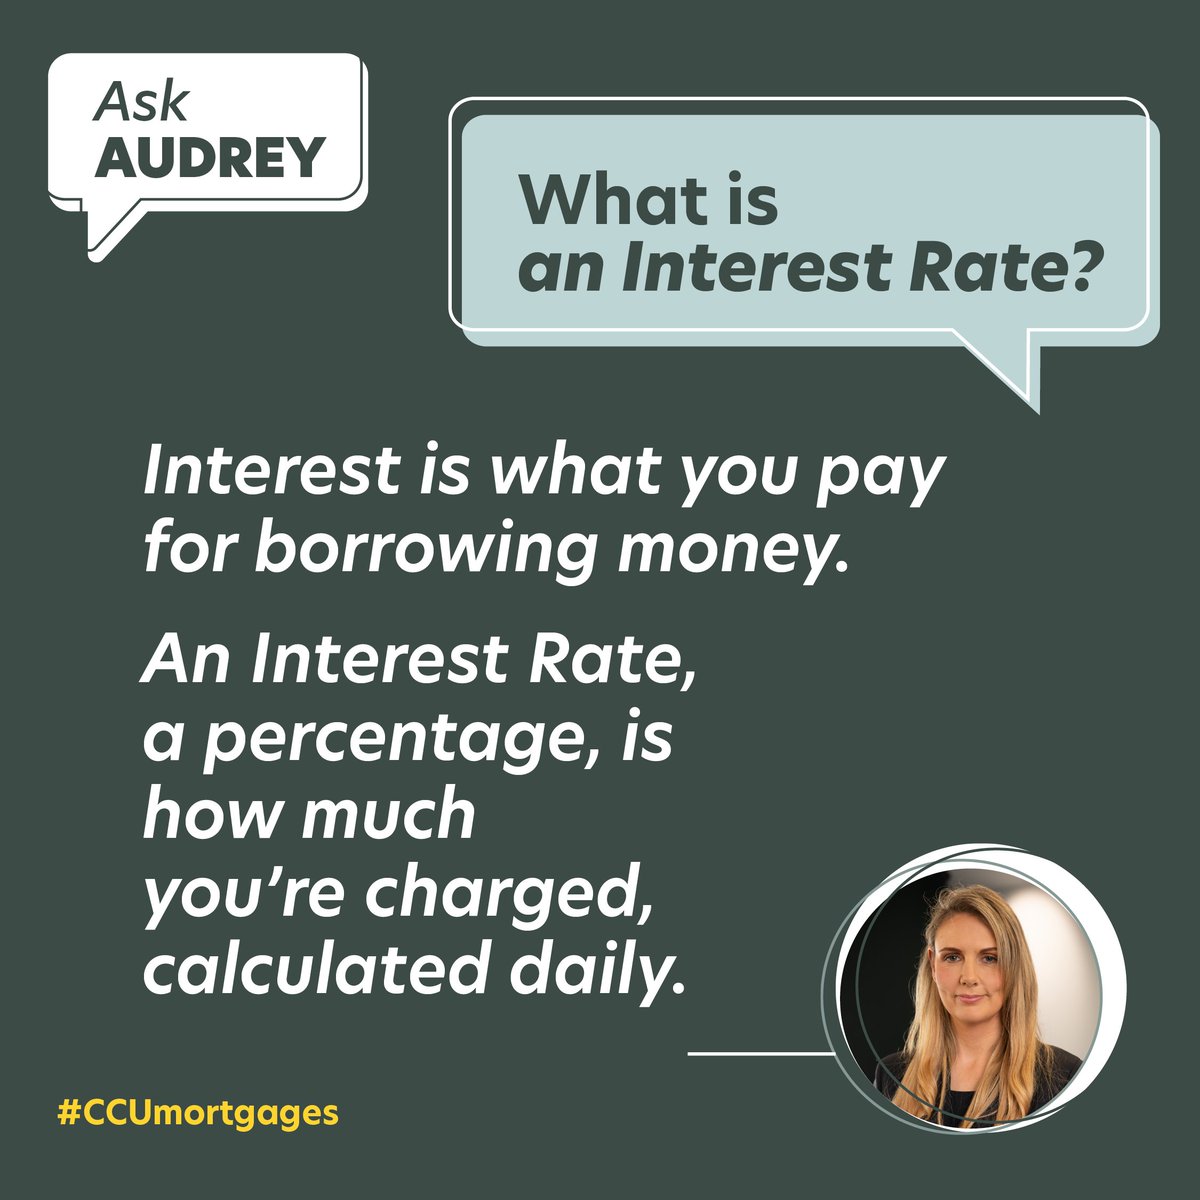 Understanding interest rates can save you money in the long run. 
If you need some guidance, reach out! We’re here to help demystify the process and make sure you’re in control of your repayments from the start.
#AskAudrey #MortgageTips #CCUmortgages #mortgagehelp